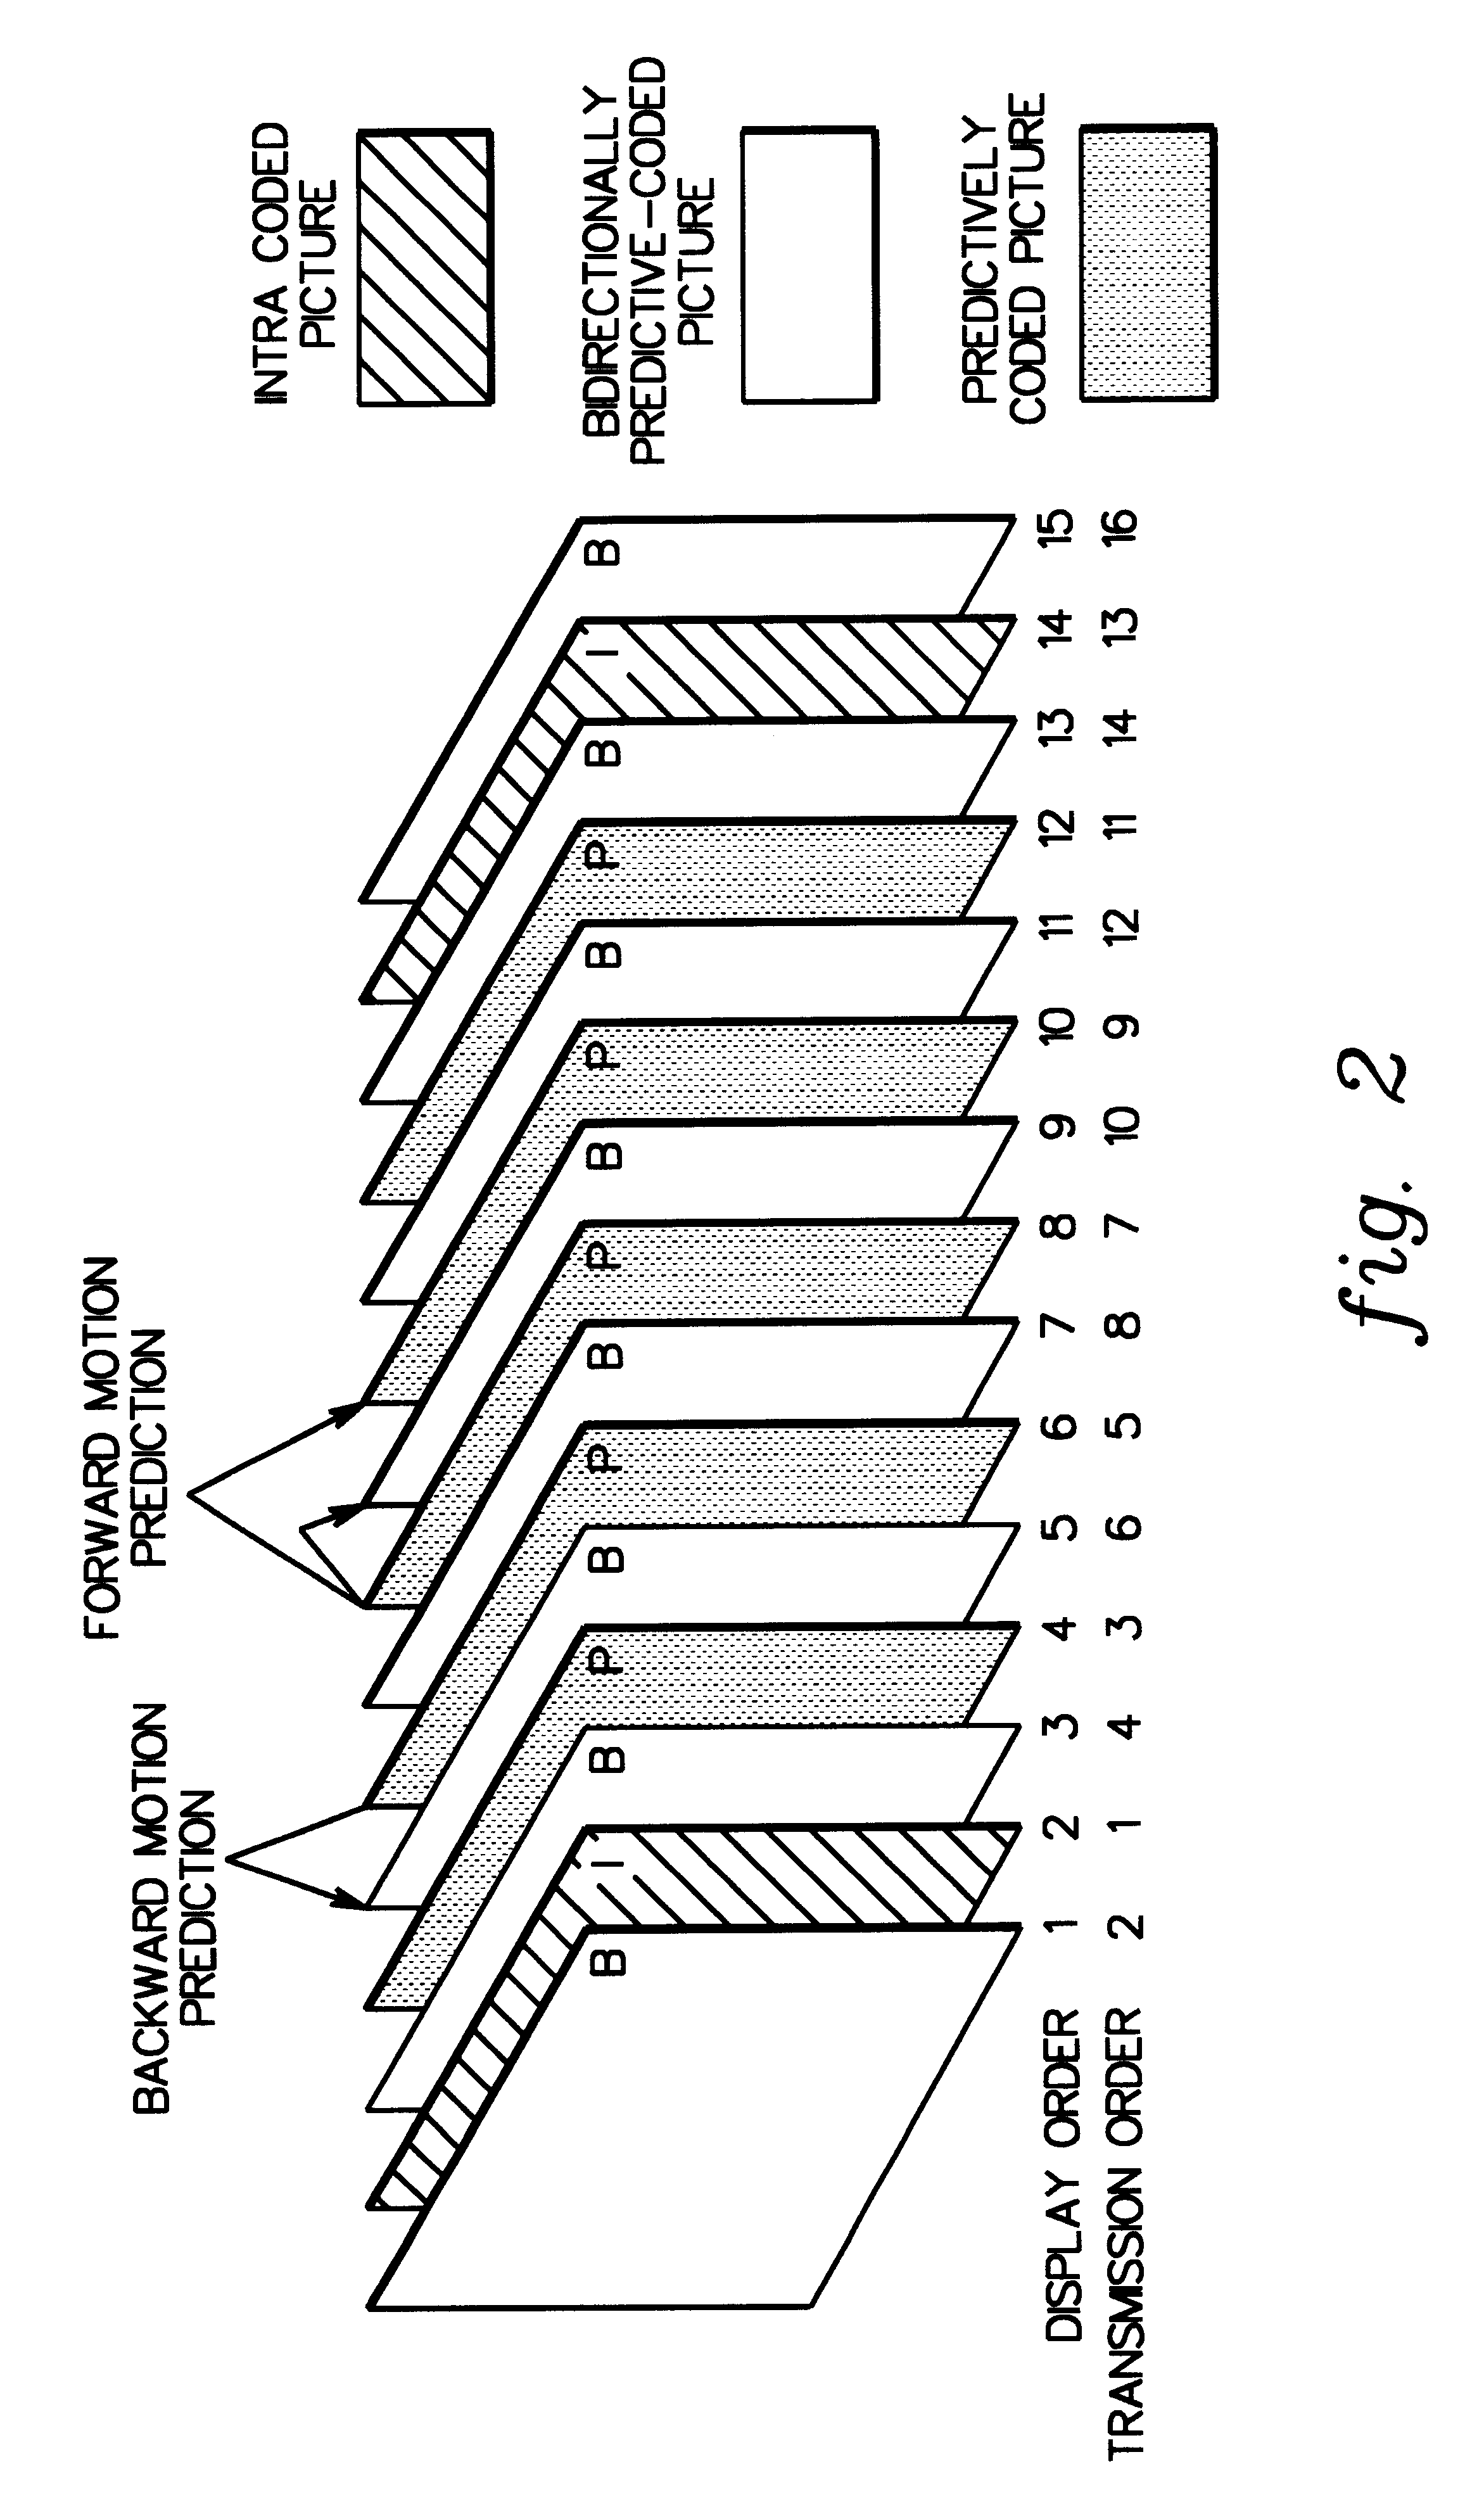 Adaptively encoding multiple streams of video data in parallel for multiplexing onto a constant bit rate channel